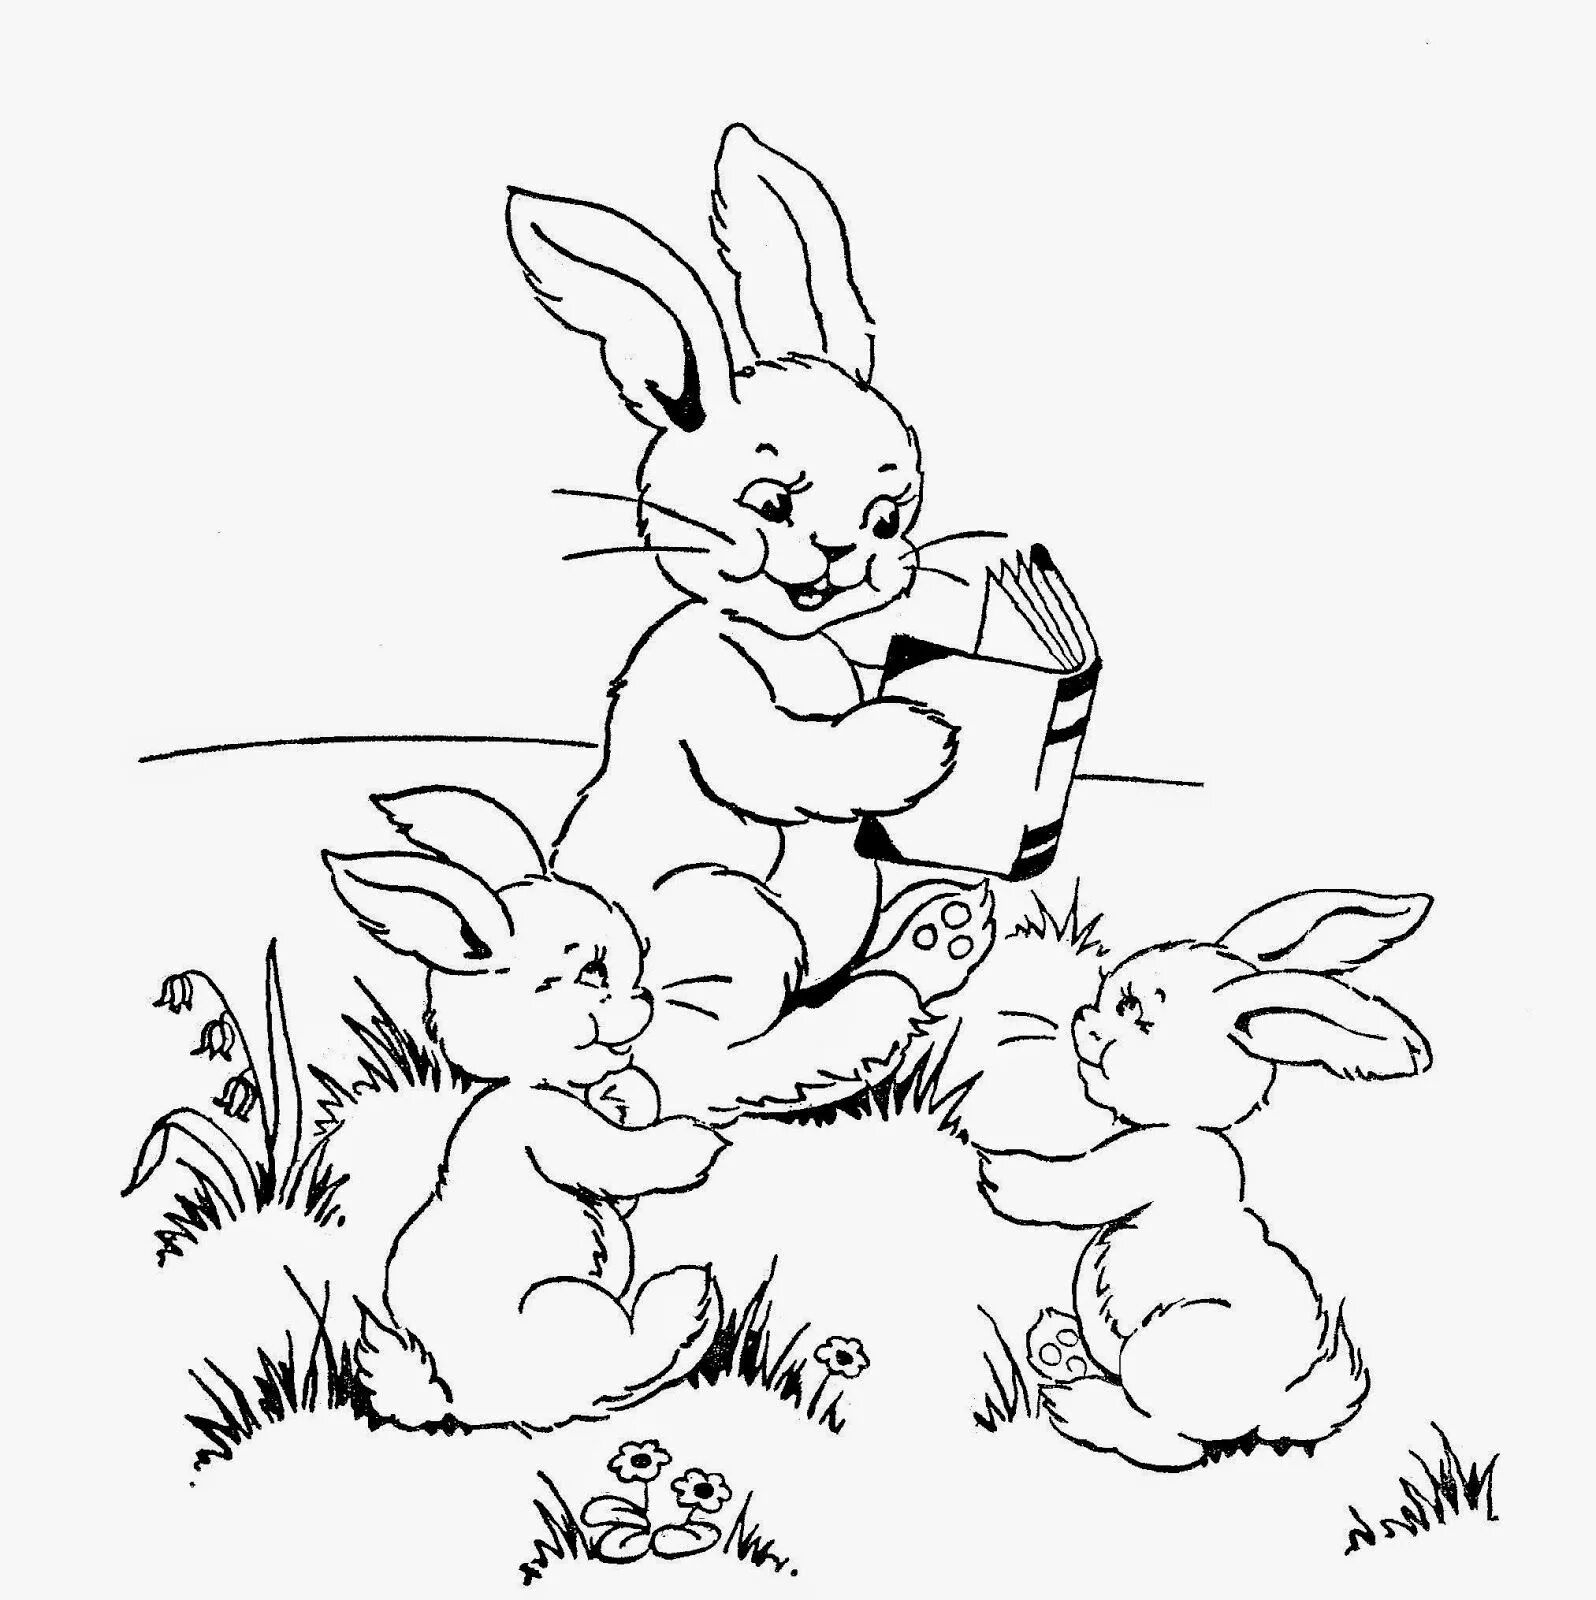 Hare with bunnies #14